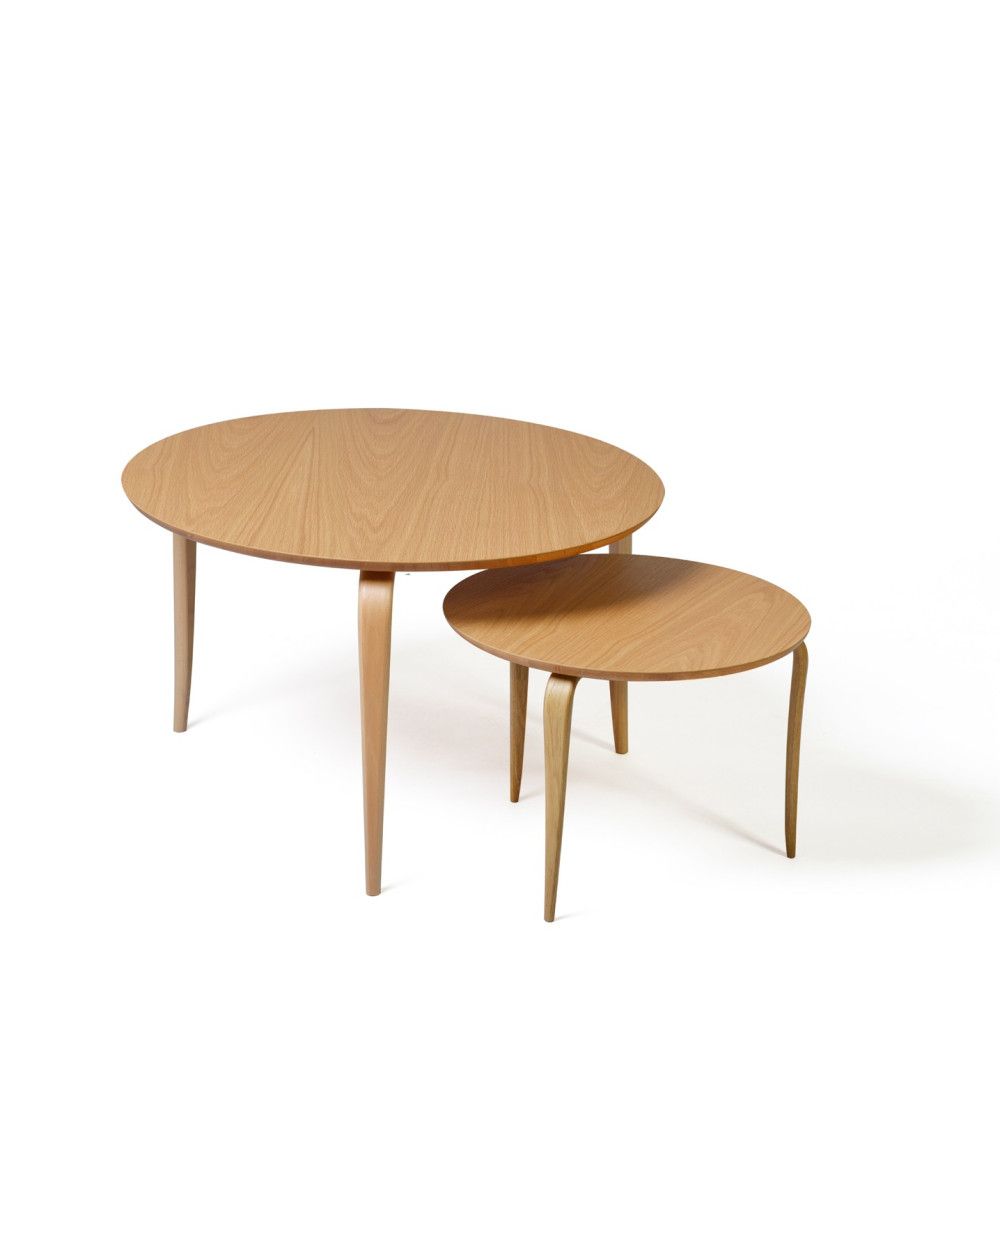 Annika Coffee Table, Bruno Mathsson Design, La Boutique Danoise With Regard To Modern Wooden X Design Coffee Tables (View 14 of 15)